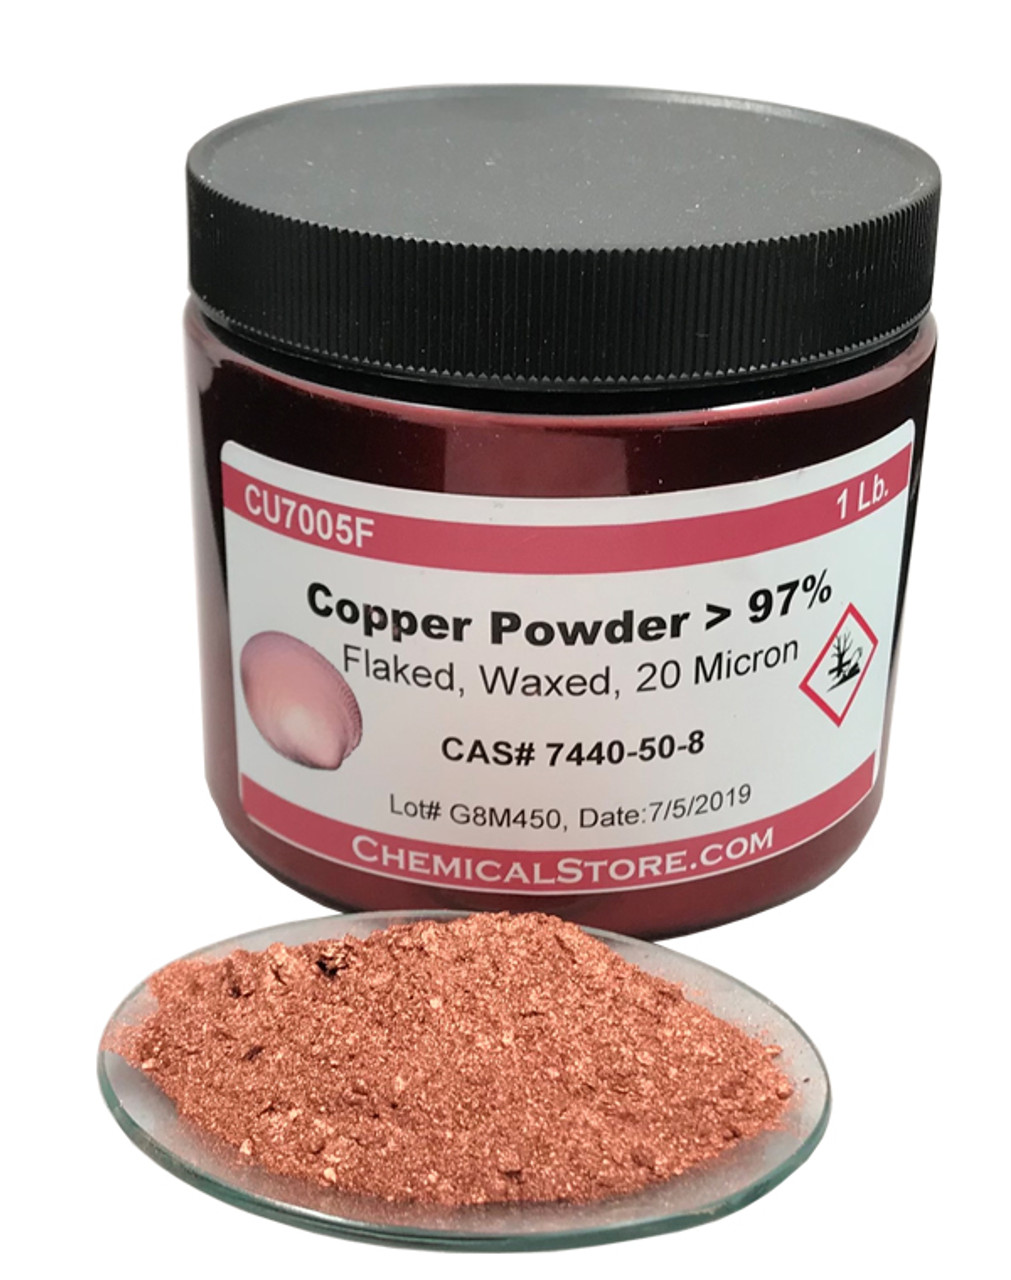 Copper Powder, Flaked, Waxed, Pigment 